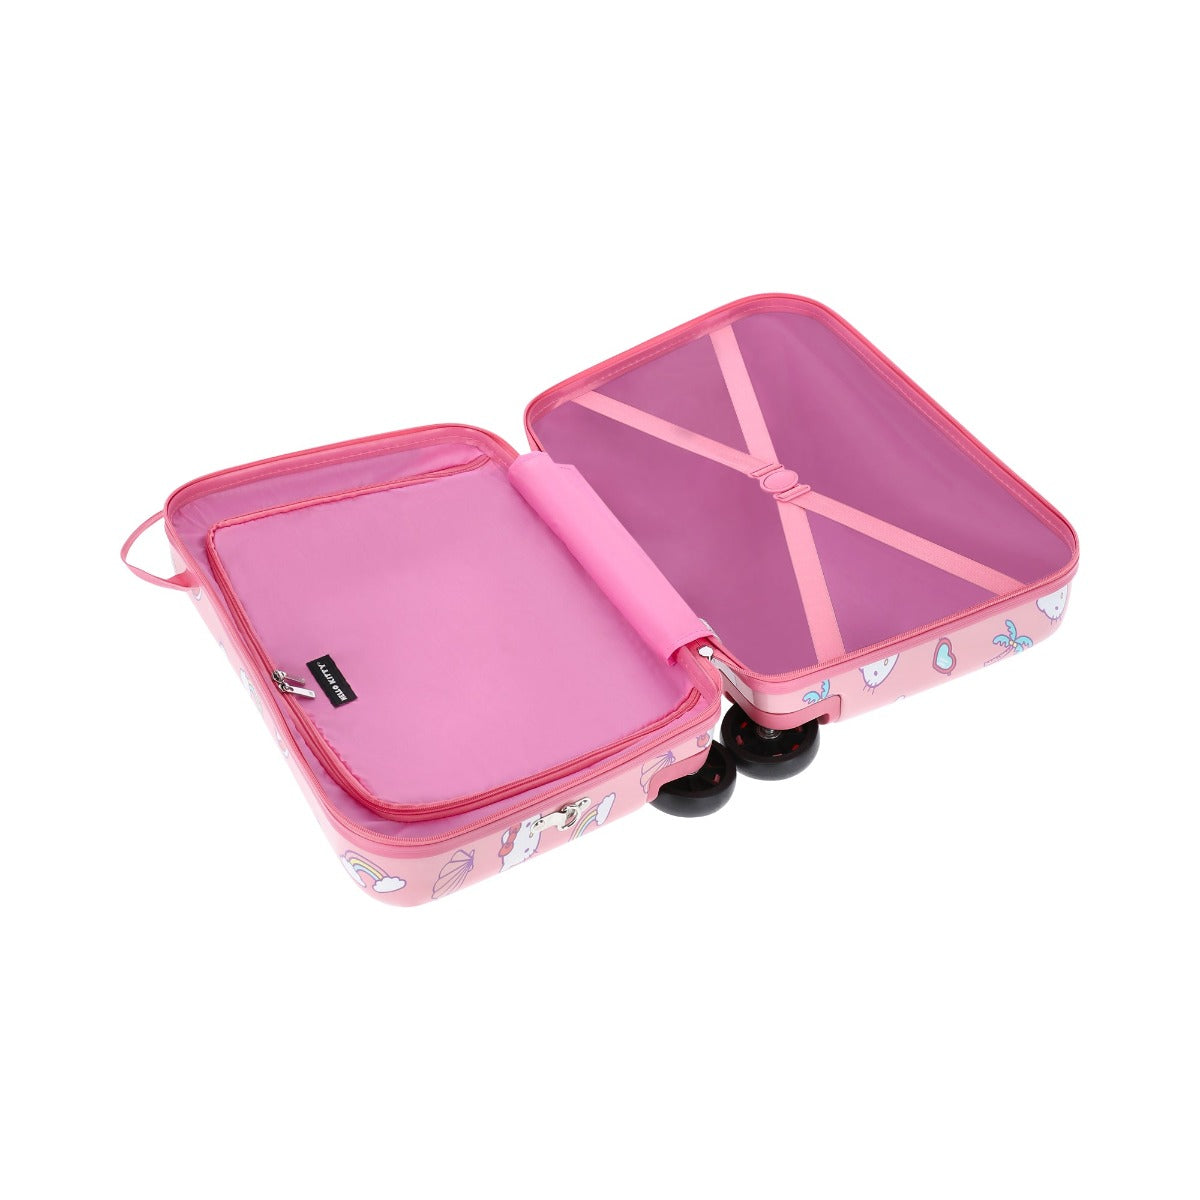 Pink Hello Kitty Summertime Ride-on 14.5" rolling luggage - carry-on ride-along spinner suitcase for kids